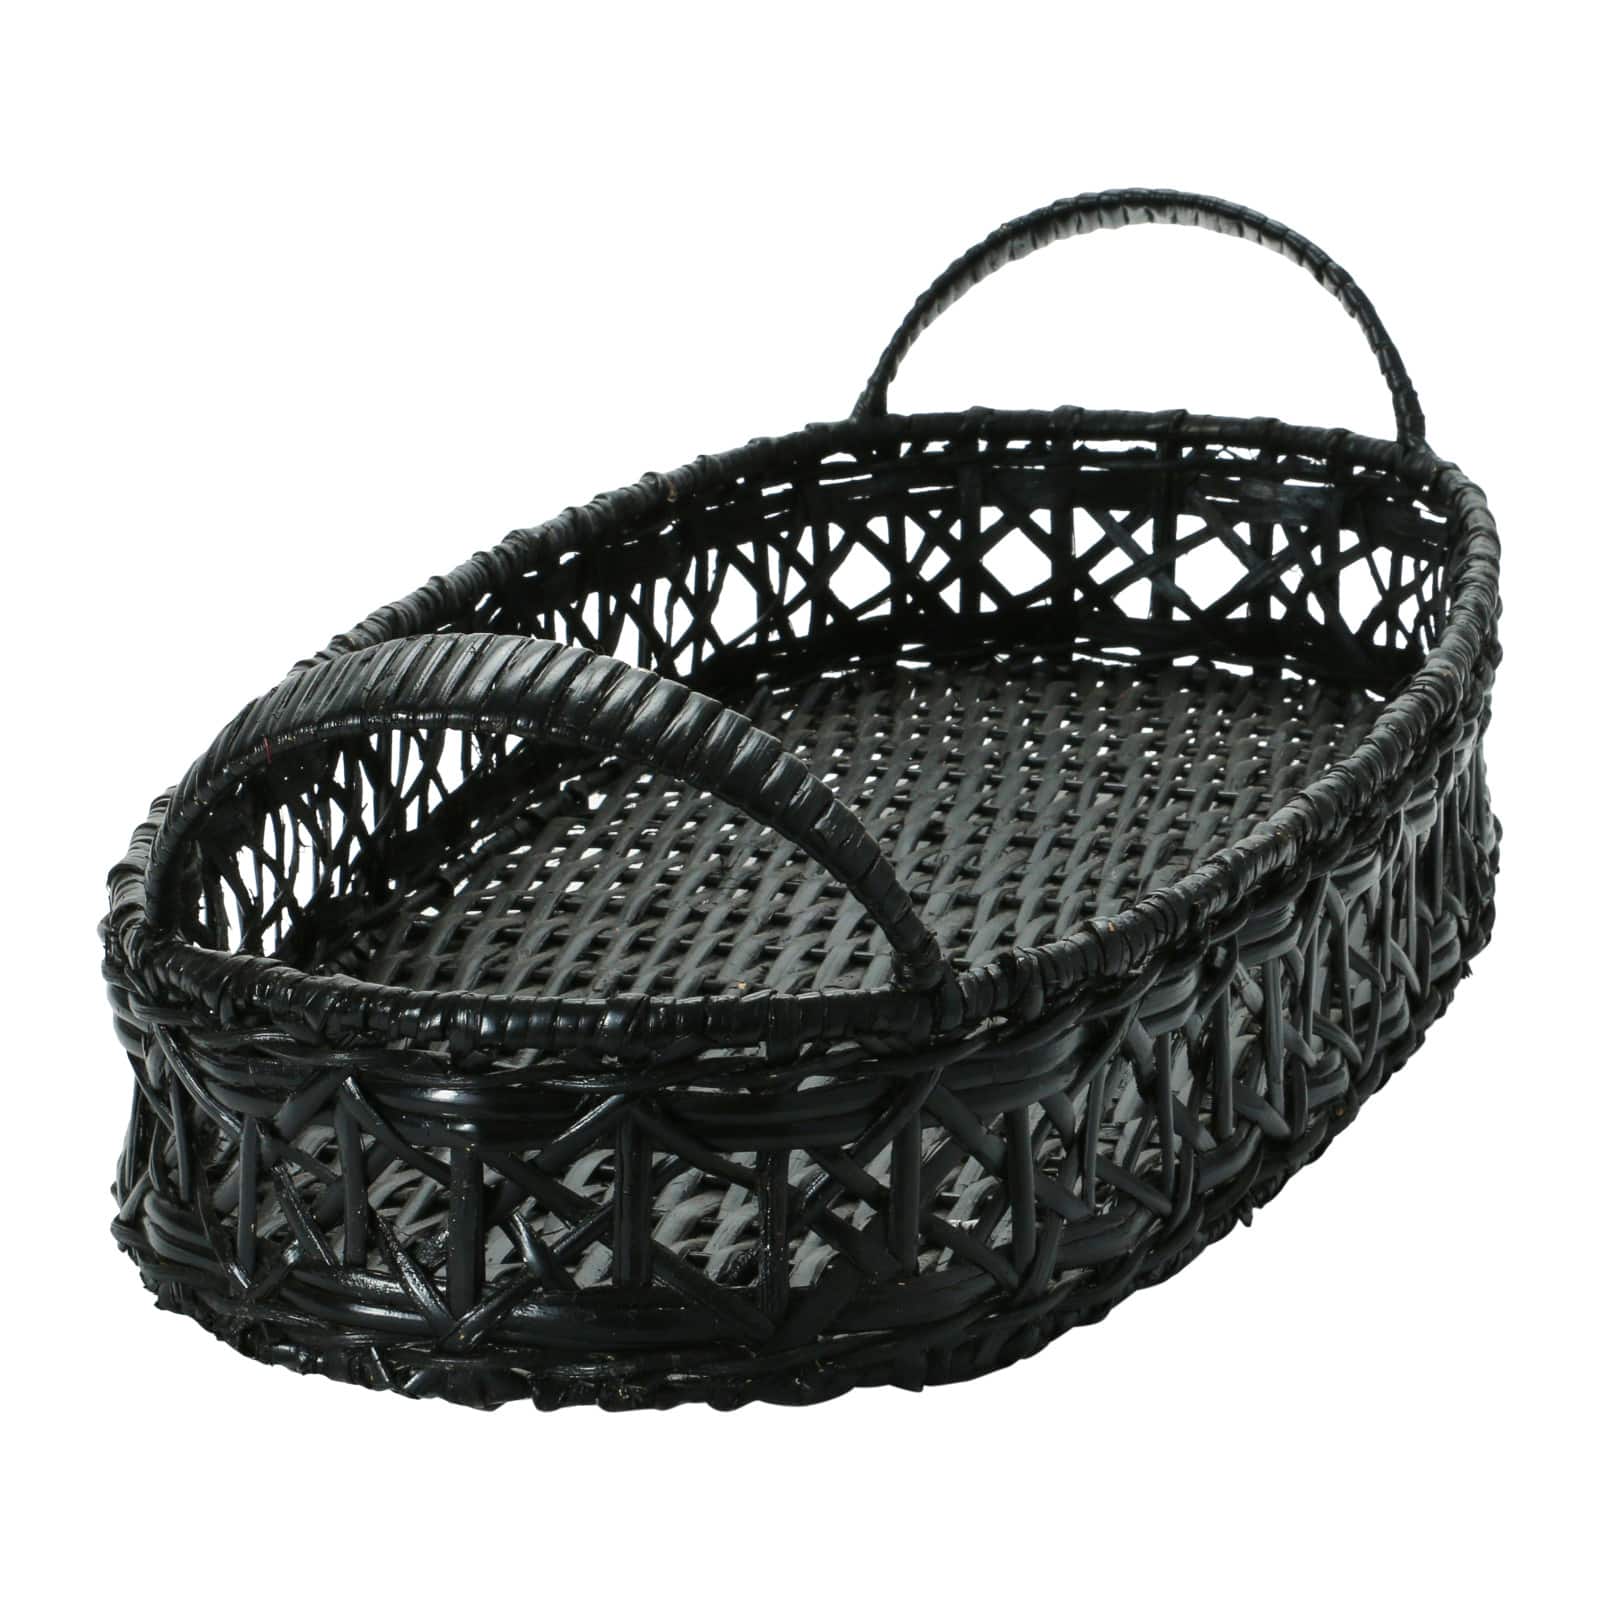 2.5ft. Black Hand-Woven Rattan Tray with Handles